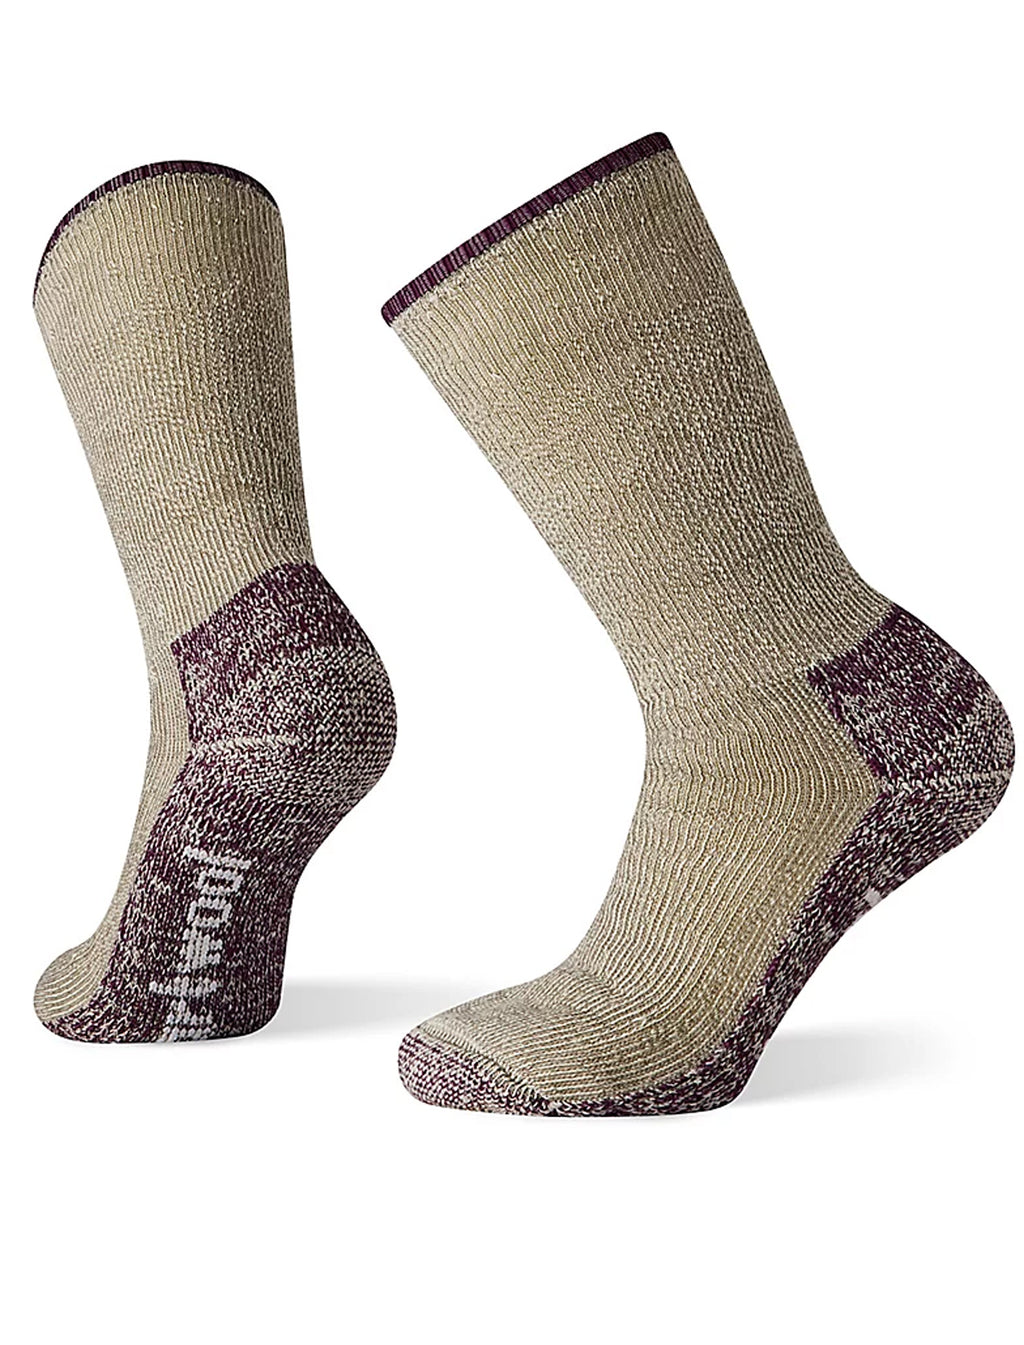 Smartwool Mountaineer Classic, Taupe 